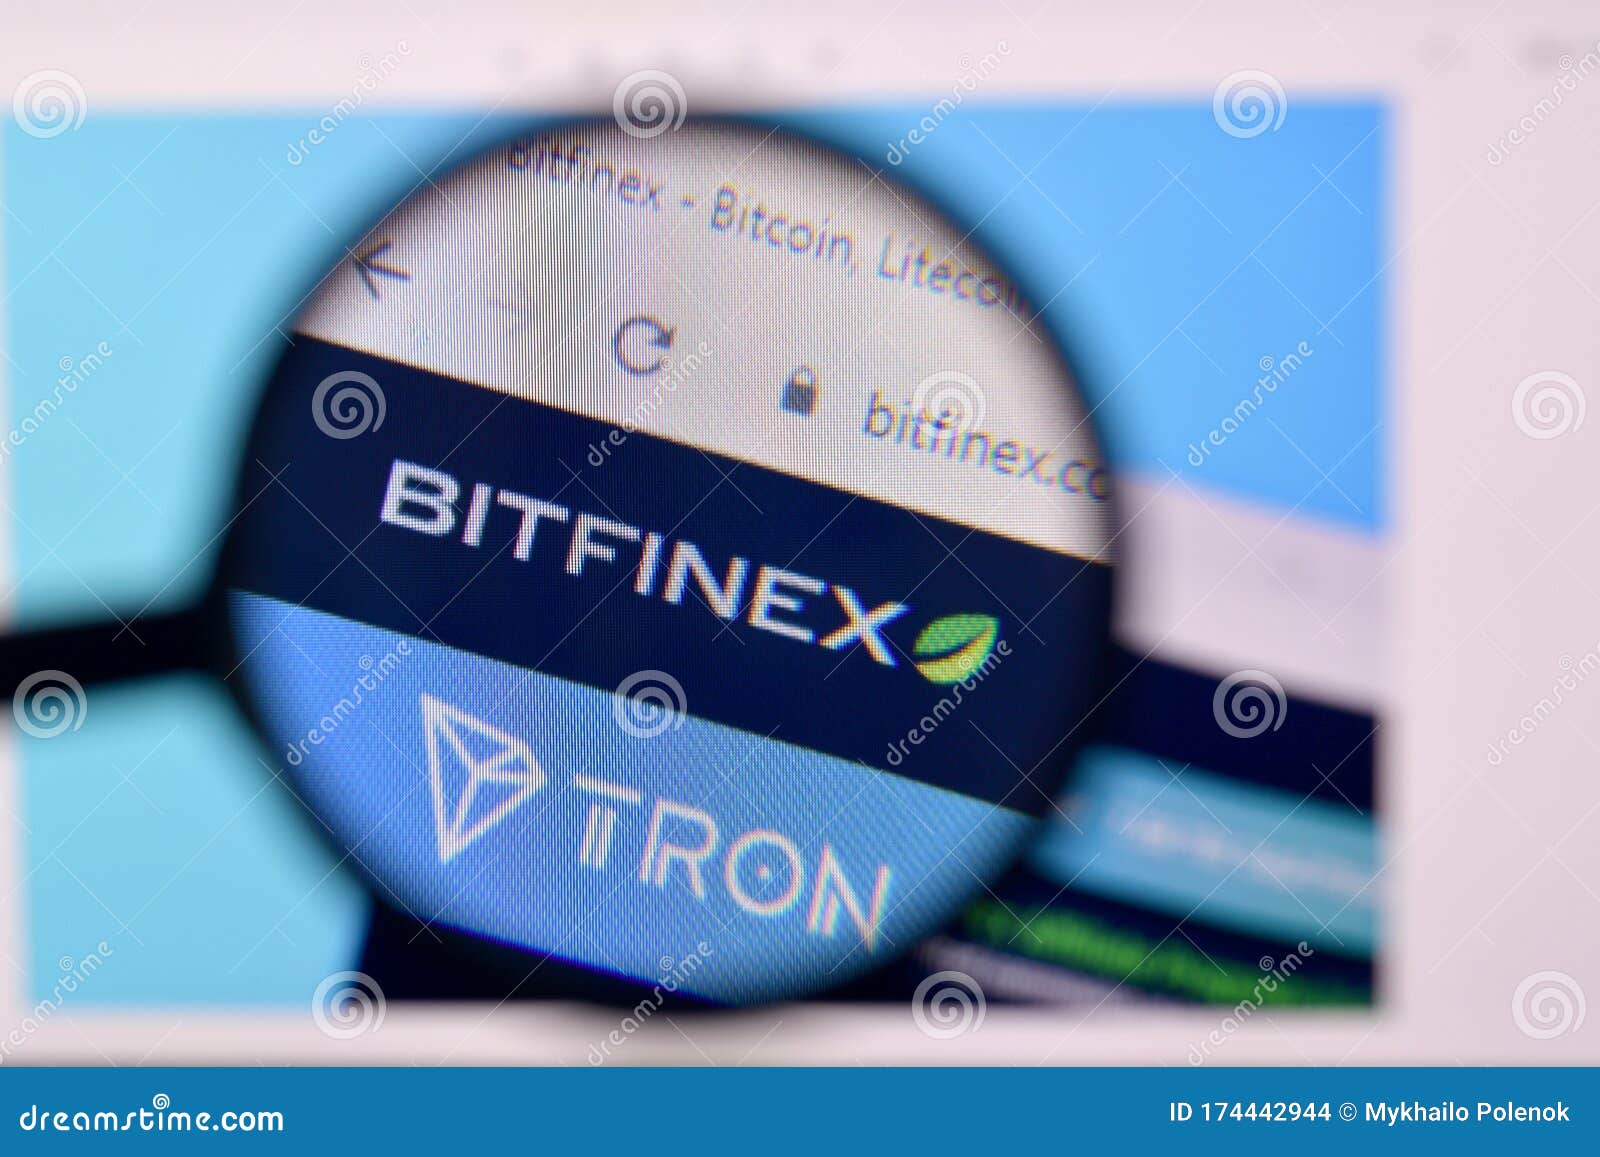 Homepage Of Bitfinex Website On The Display Of PC, Url ...